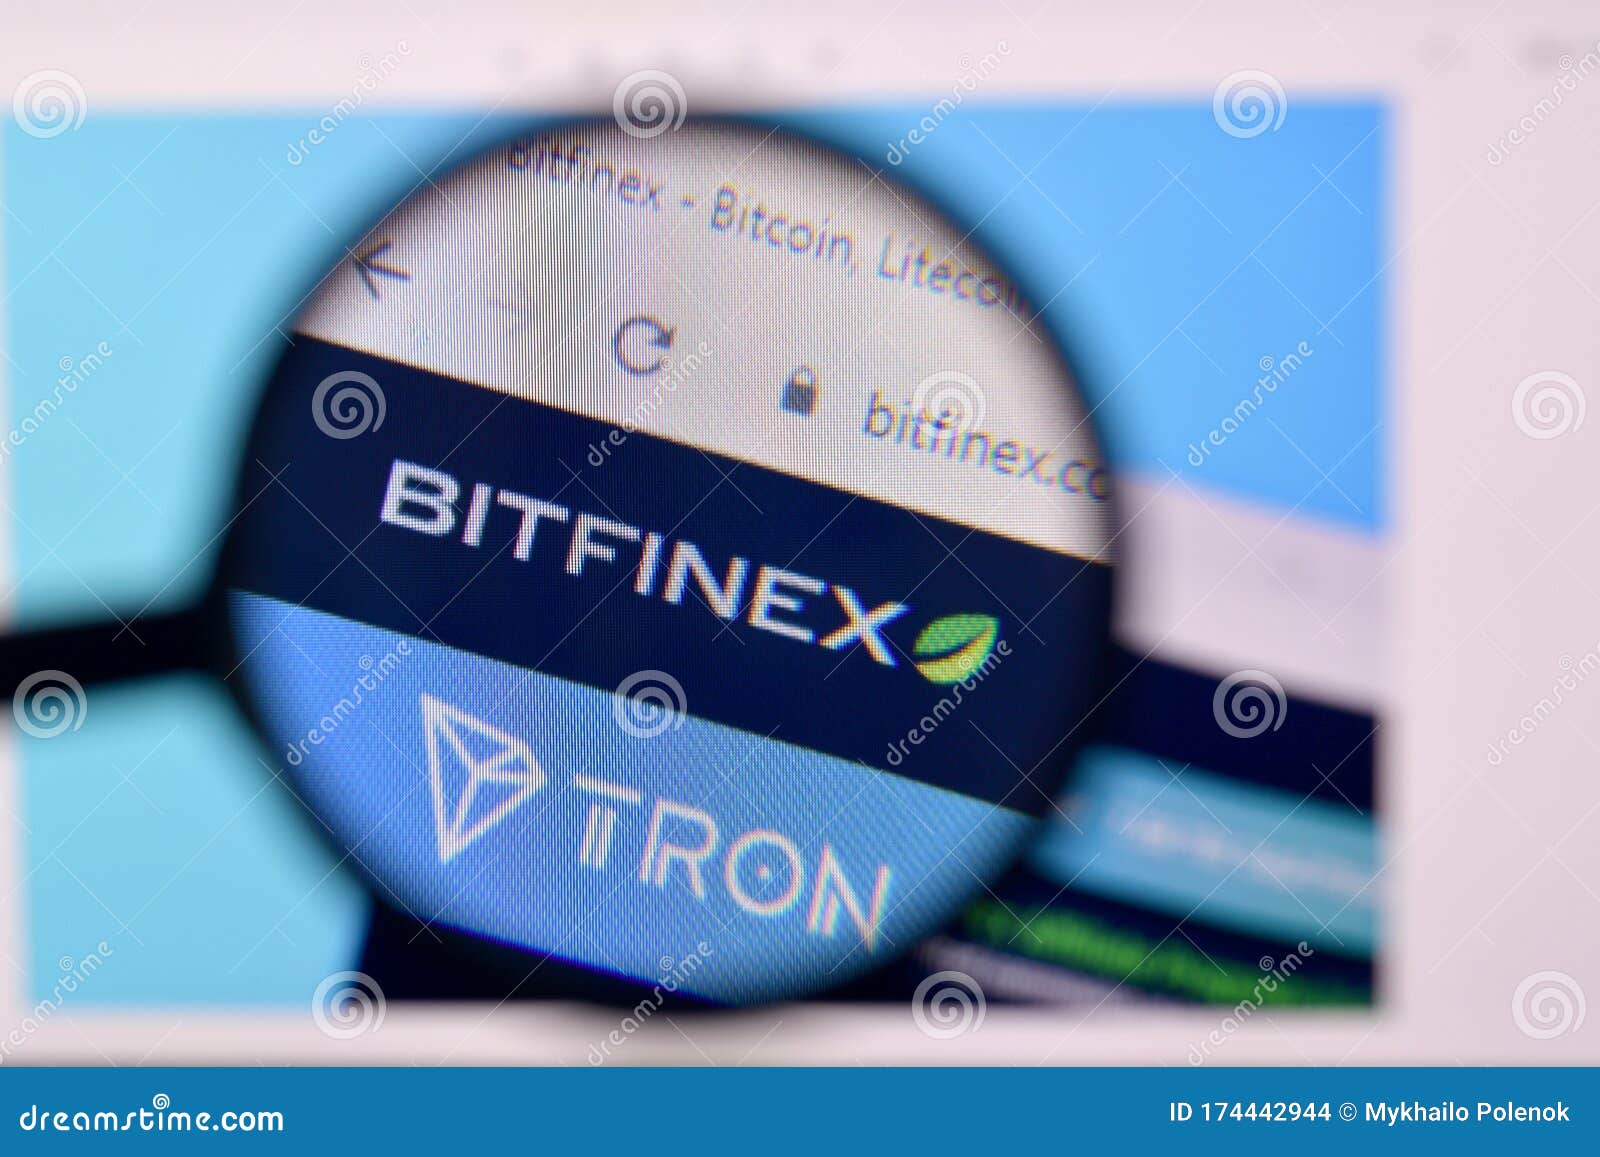 Homepage Of Bitfinex Website On The Display Of PC, Url ...